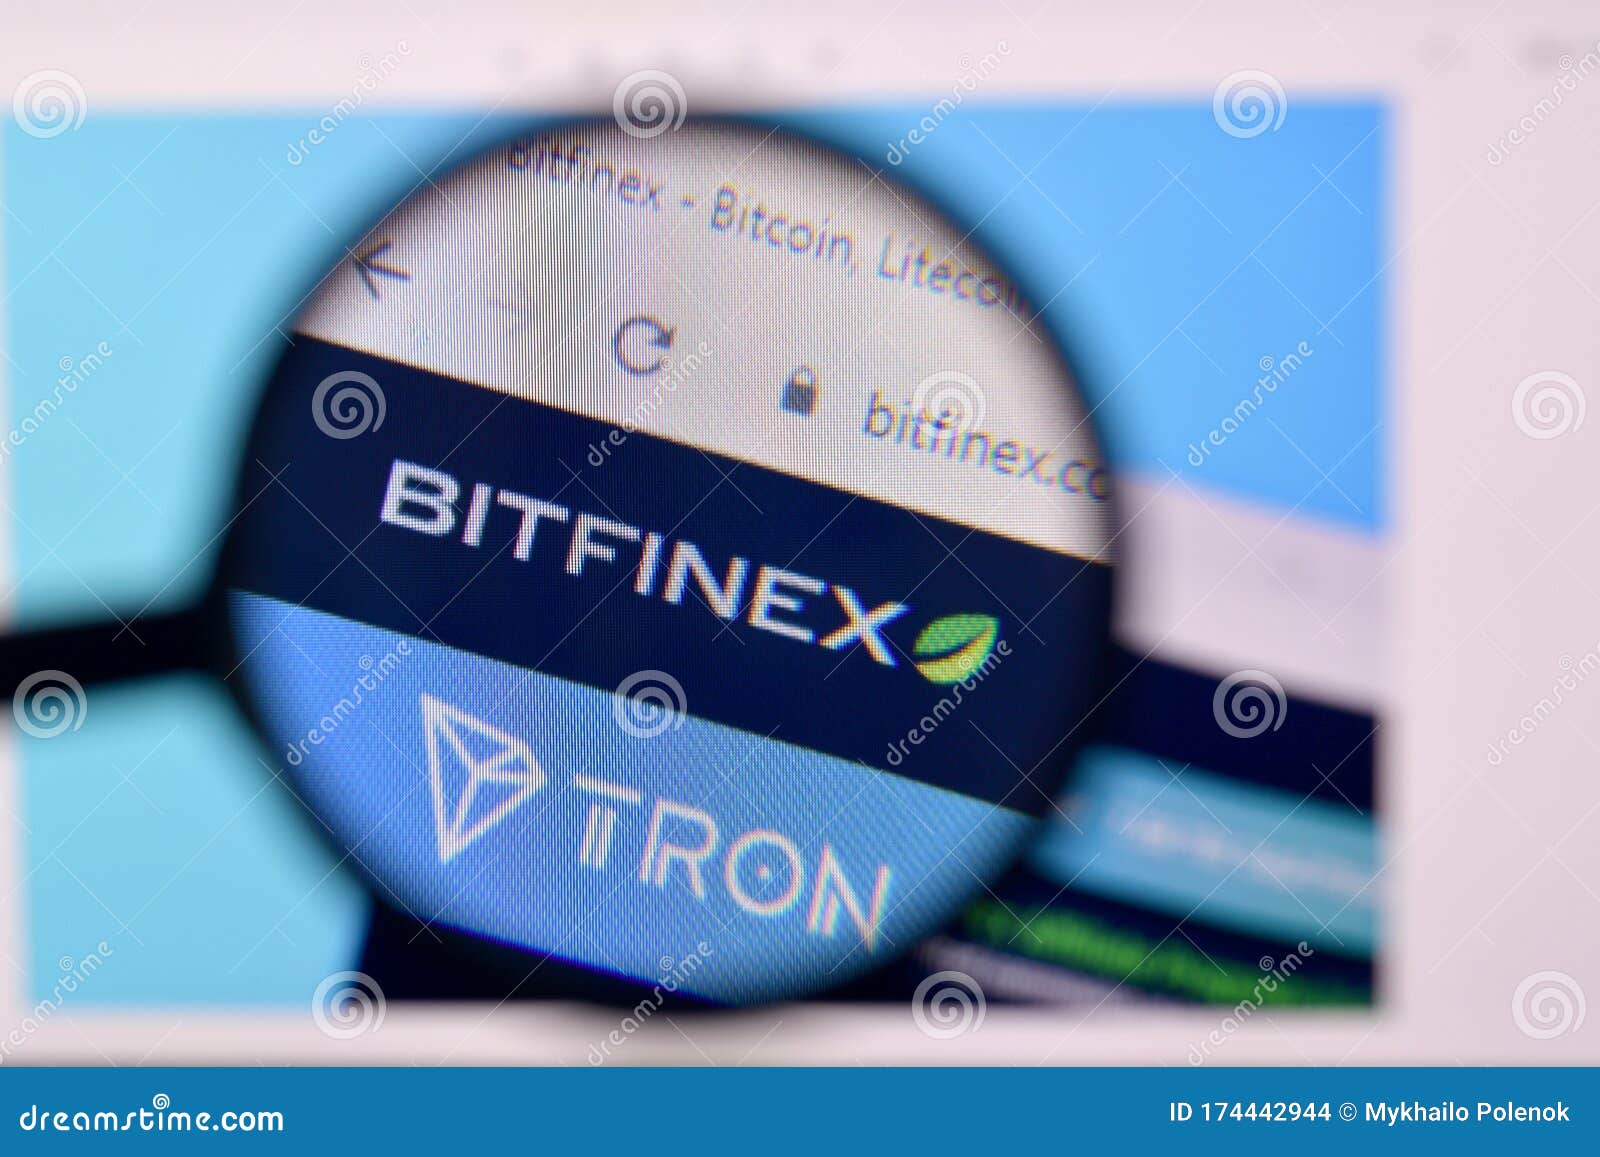 Homepage Of Bitfinex Website On The Display Of PC, Url ...